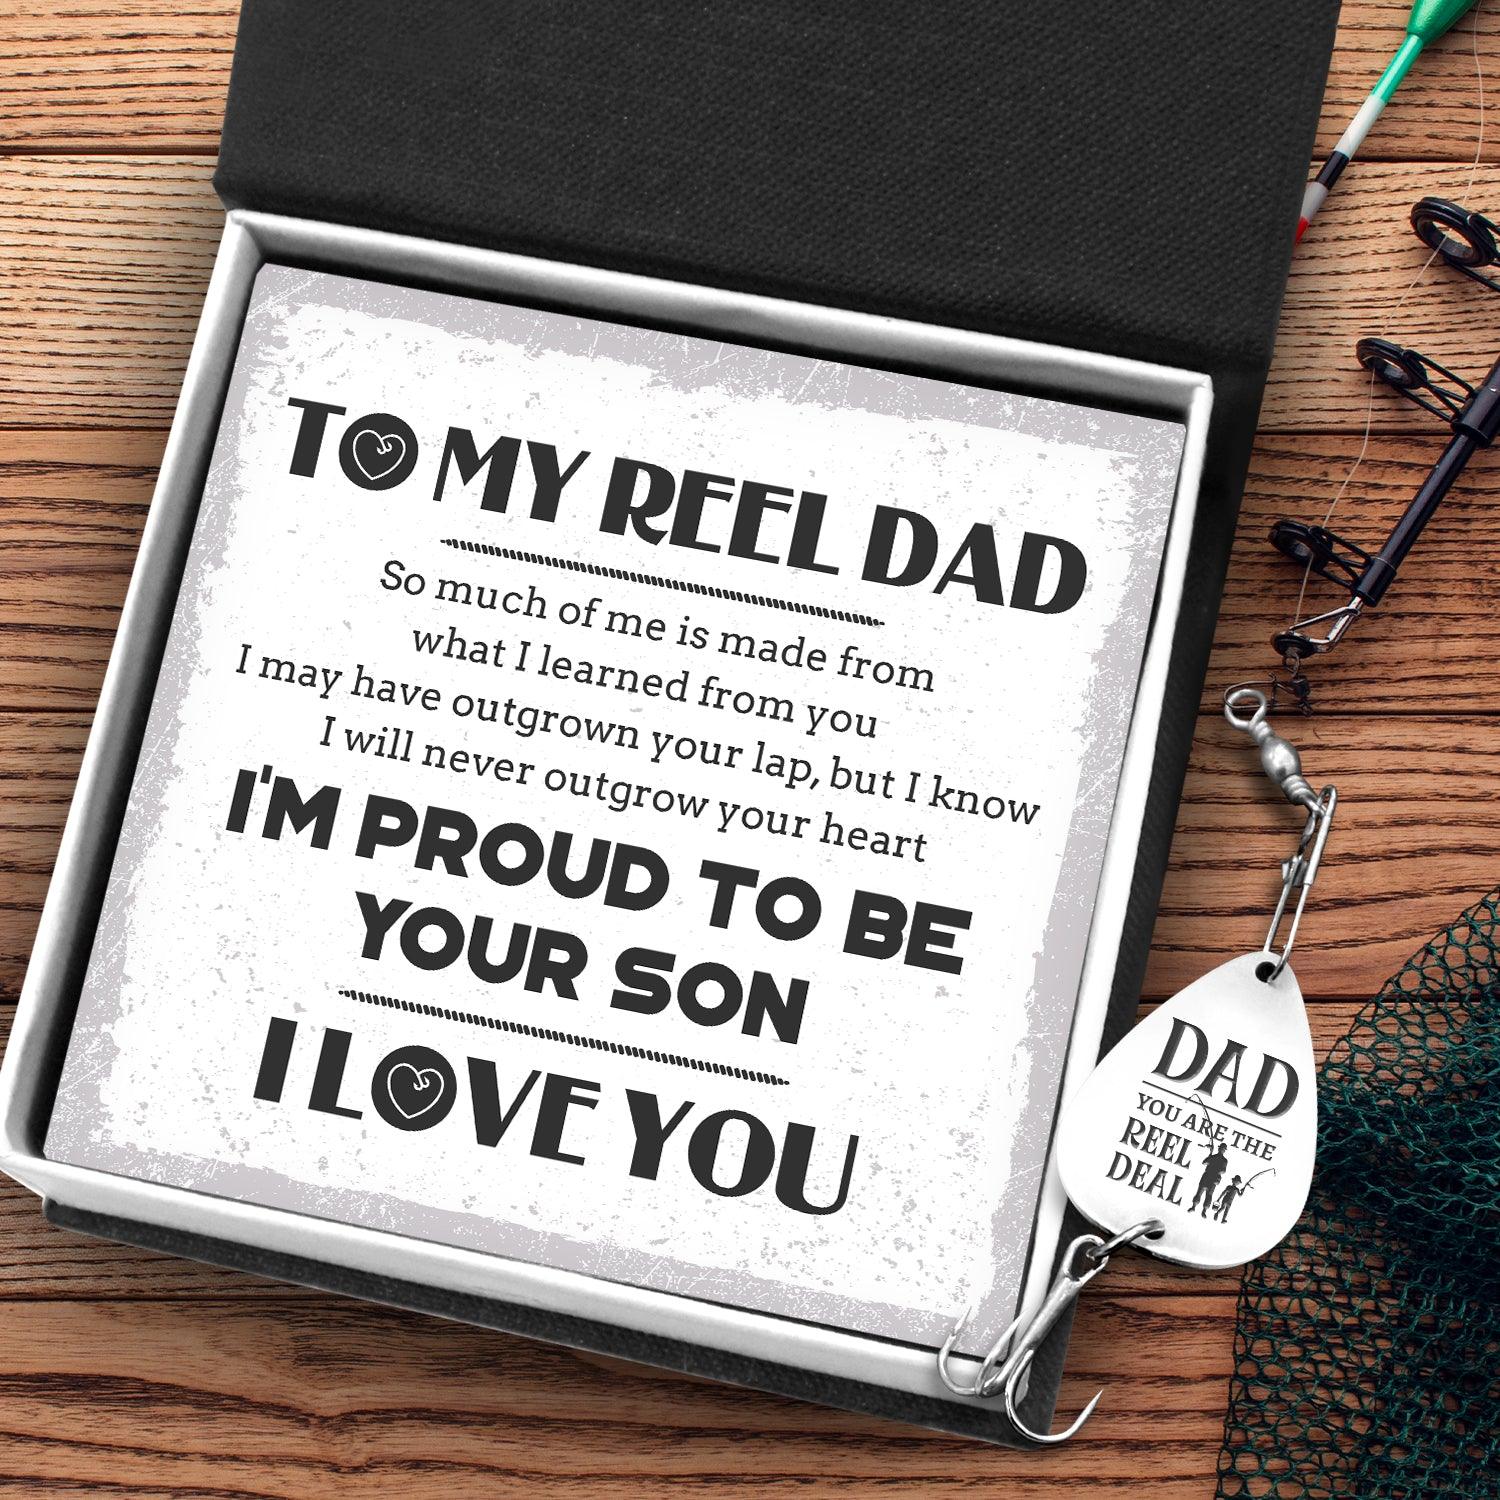 Engraved Fishing Hook - Fishing - To My Reel Dad - I'm Proud To Be Your Son - Augfa18005 - Gifts Holder